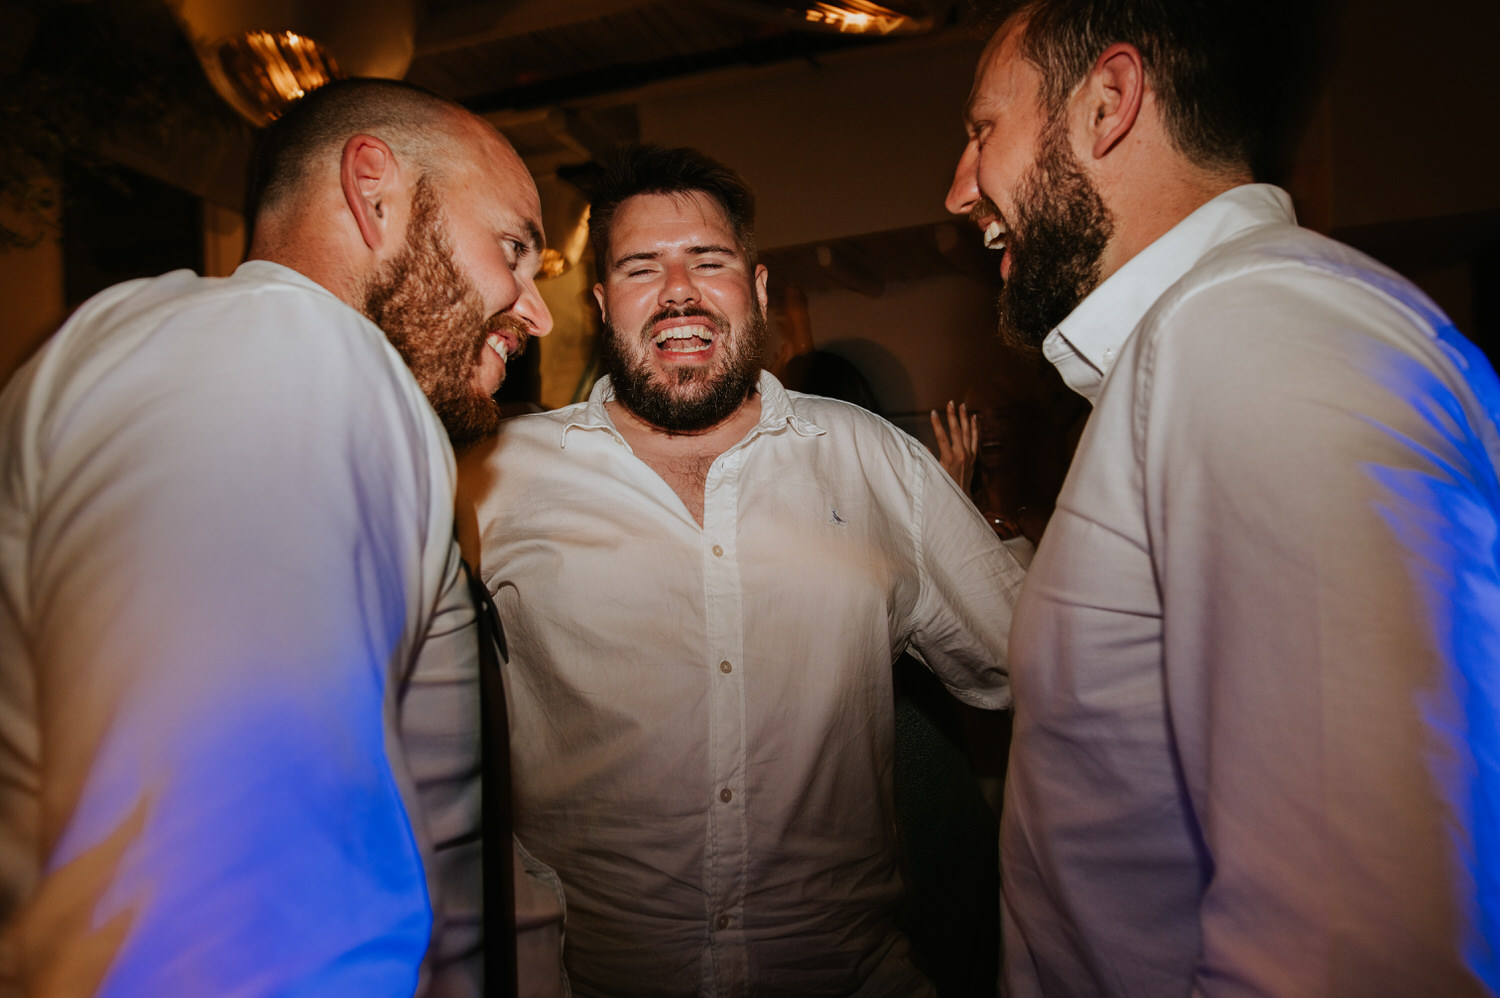 Mykonos wedding photographer: groom and his best men laughing during a night at the club.